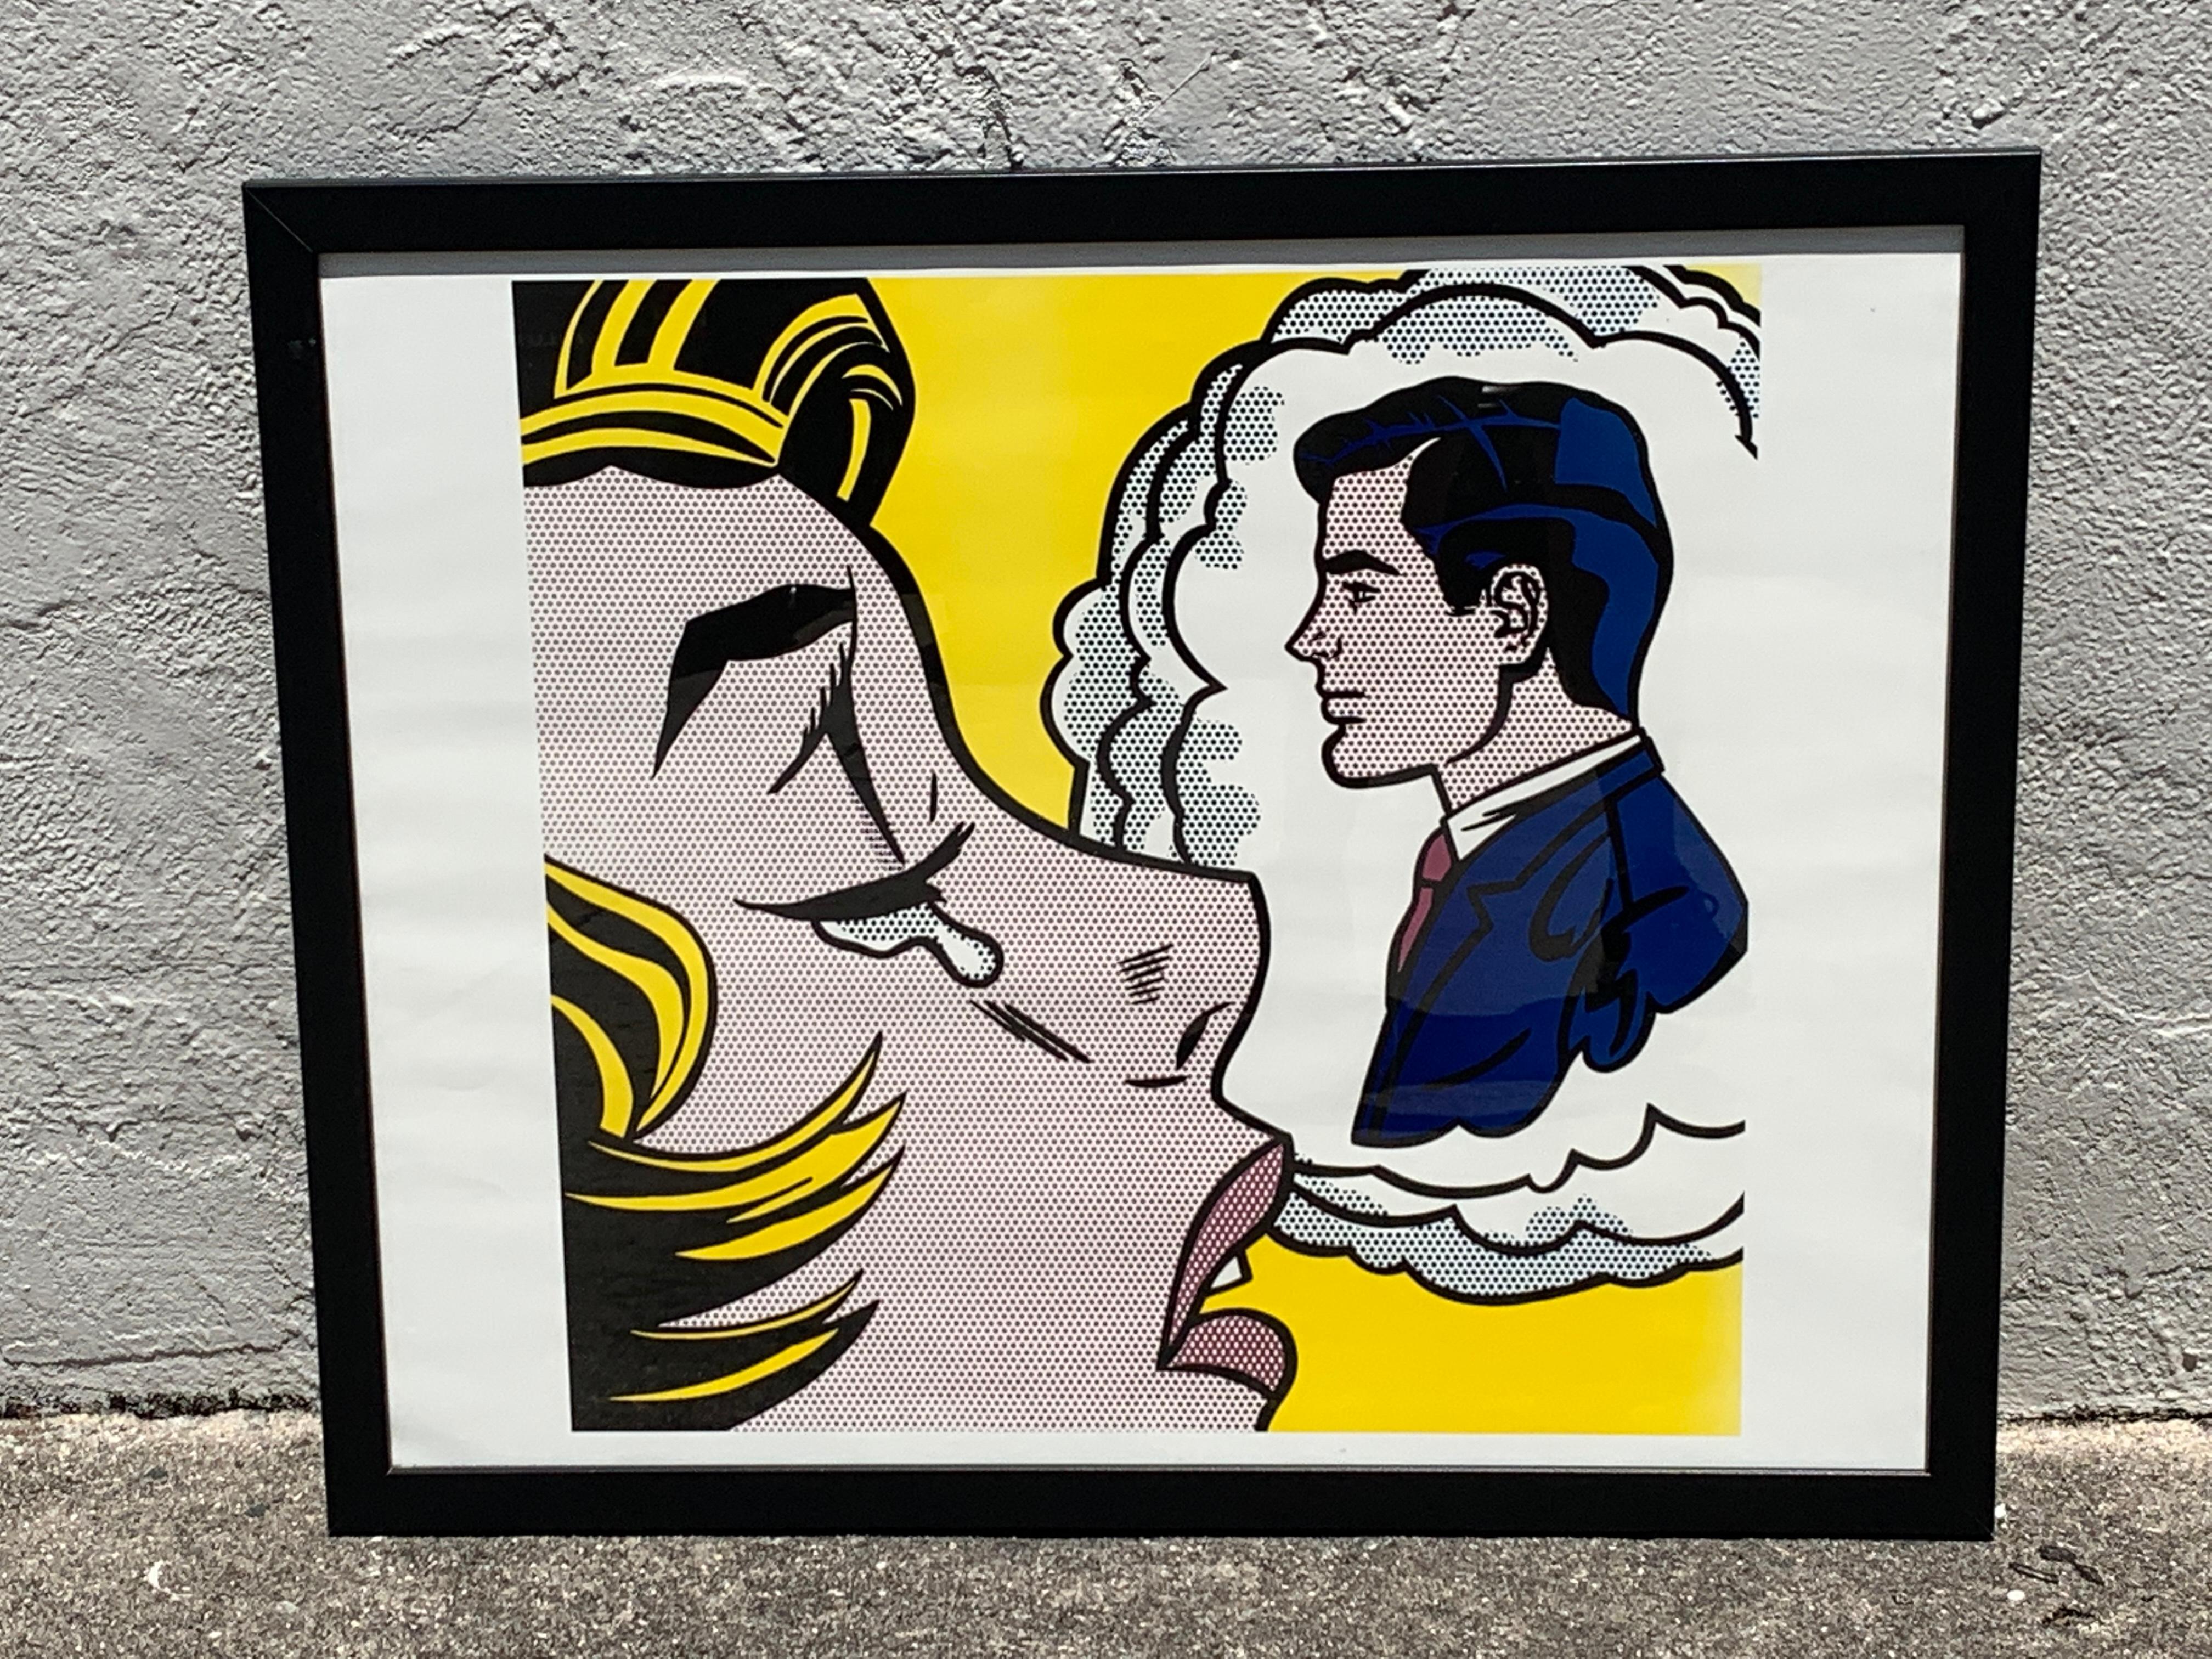 After Roy Lichtenstein Thinking of Him
Published by New York Graphic Society
24